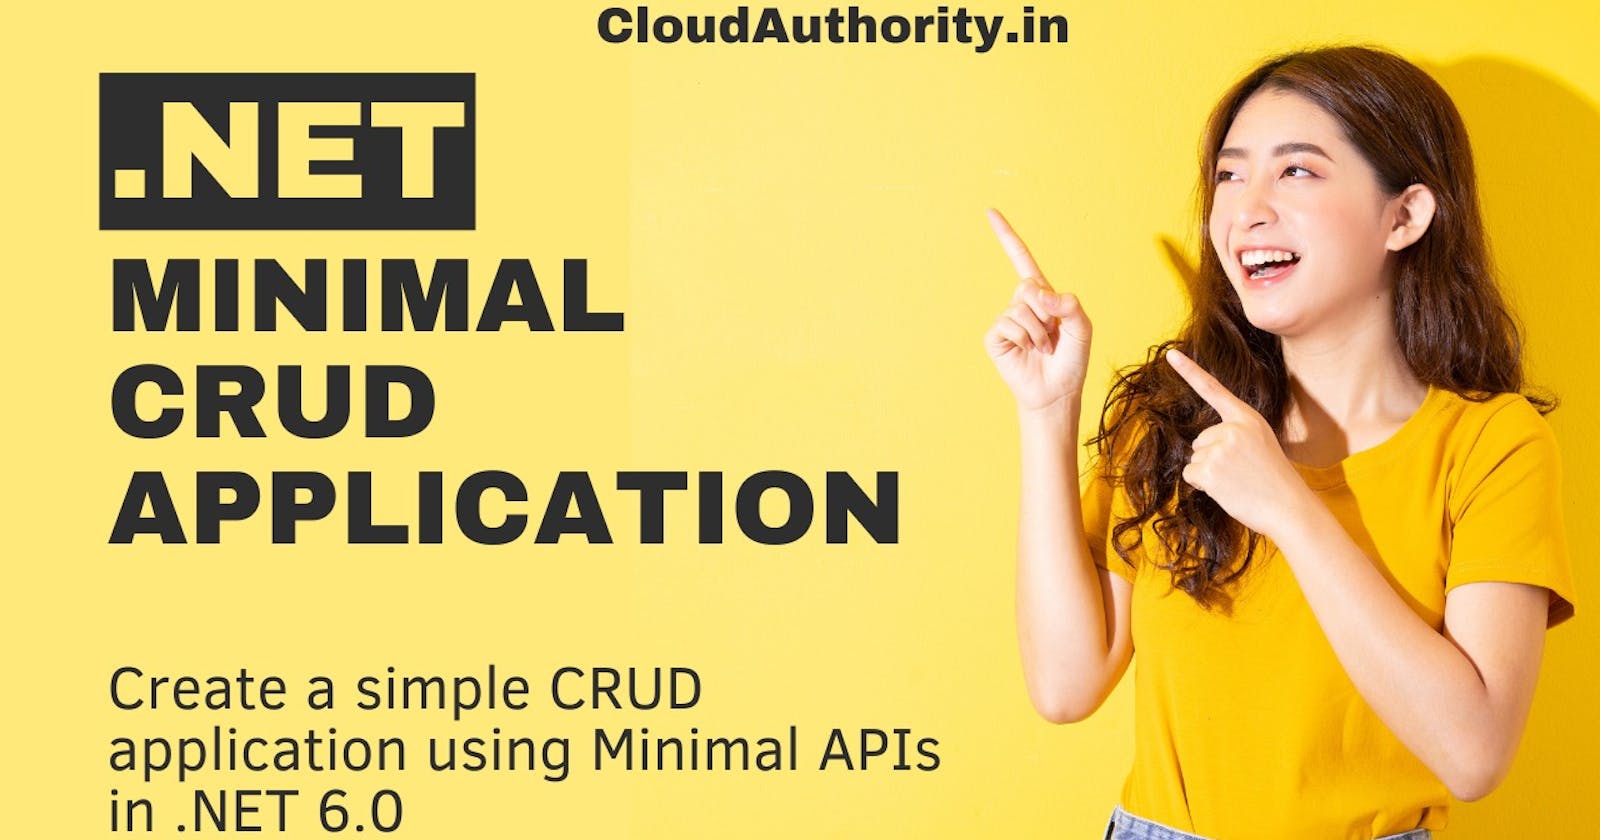 Building a CRUD Application with Minimal APIs in .NET